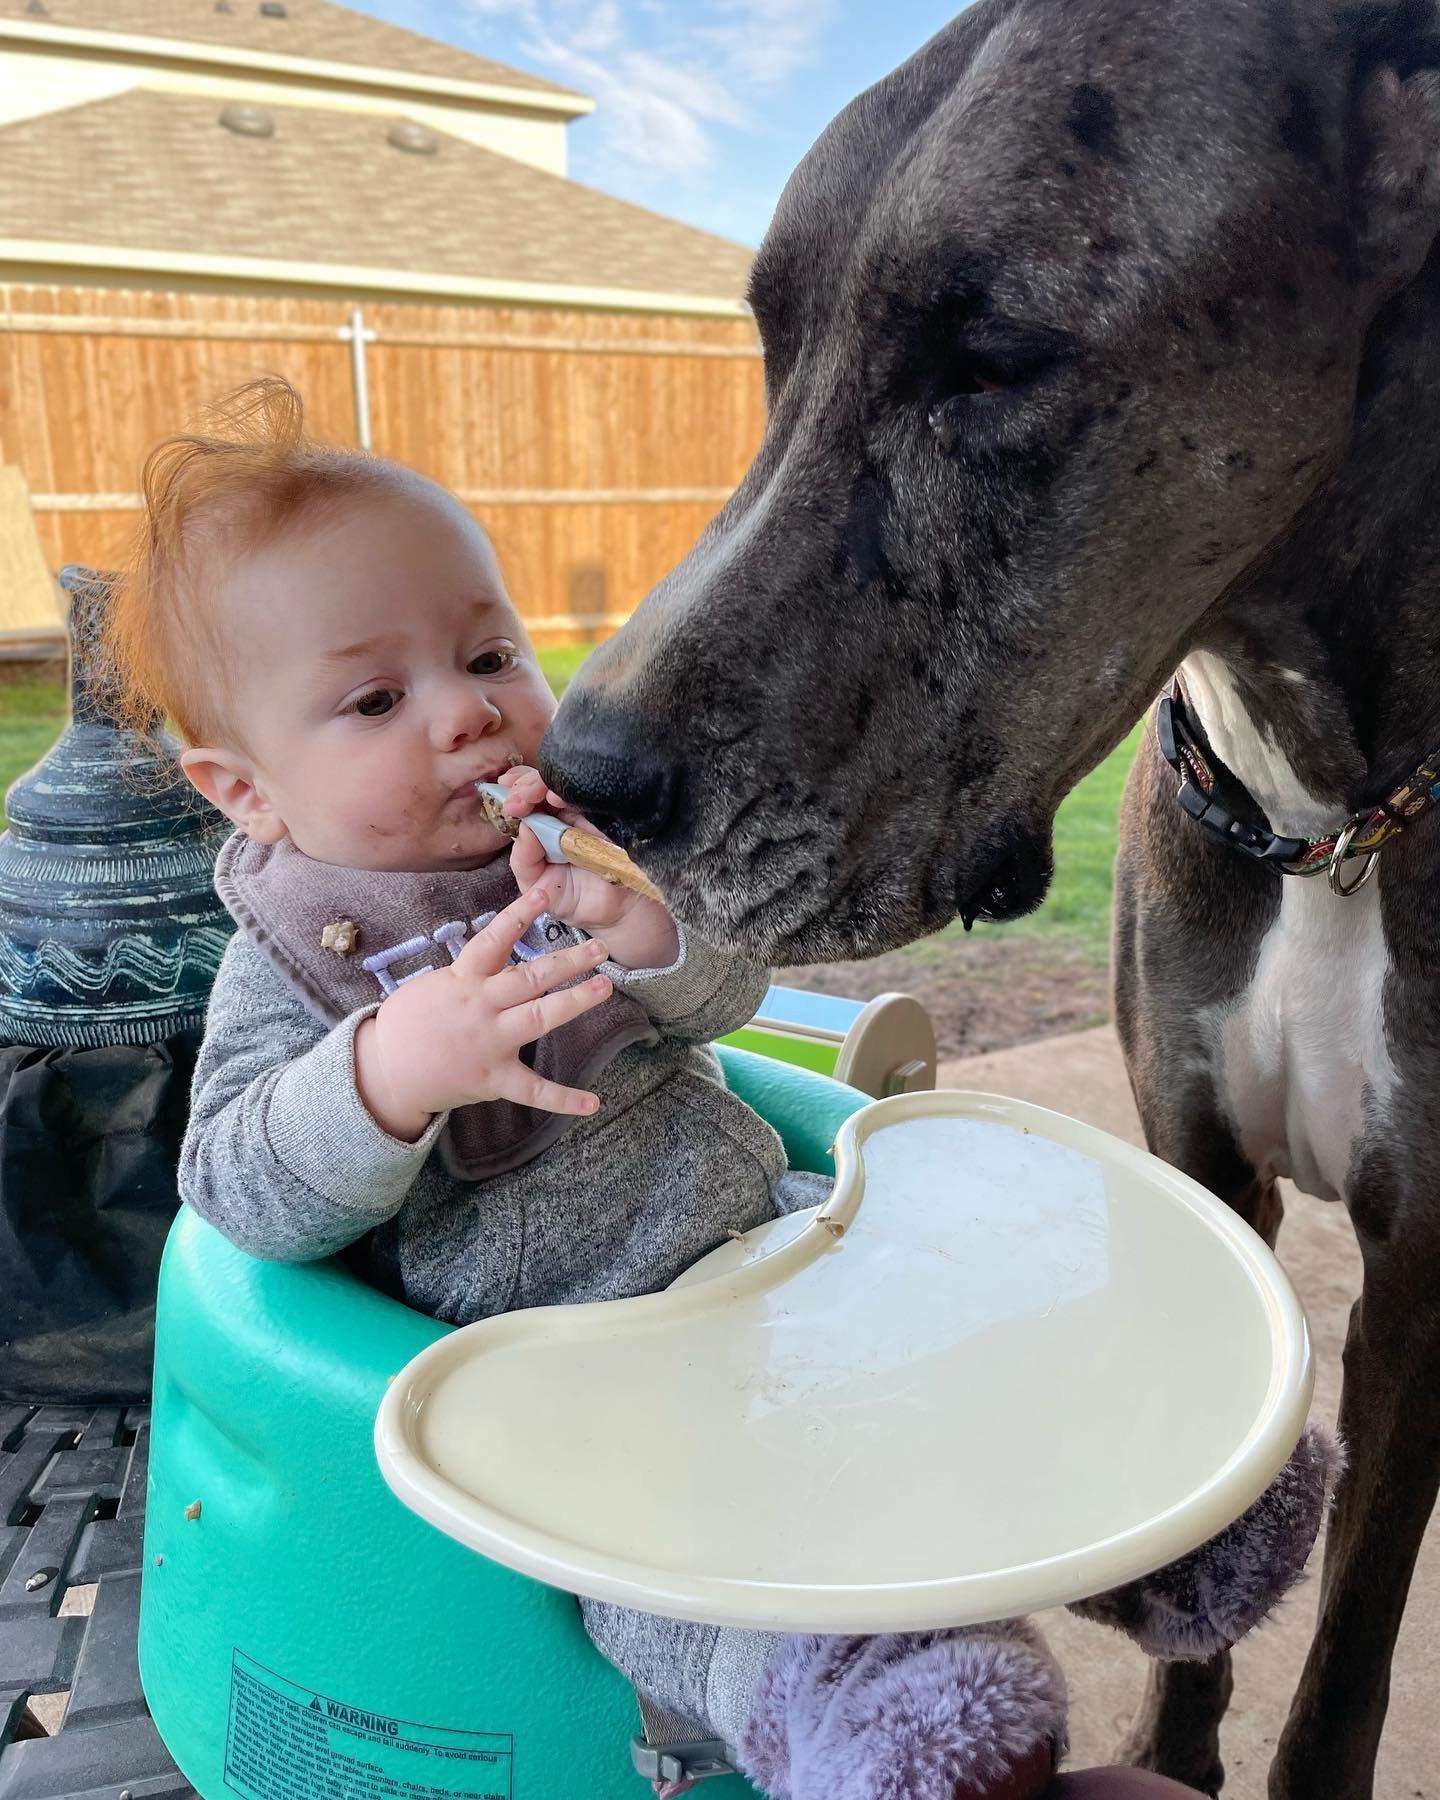 zeus sniffing food a baby is holding. the baby is eating while sitting in a feeding chair that's placed on top of a table outside.